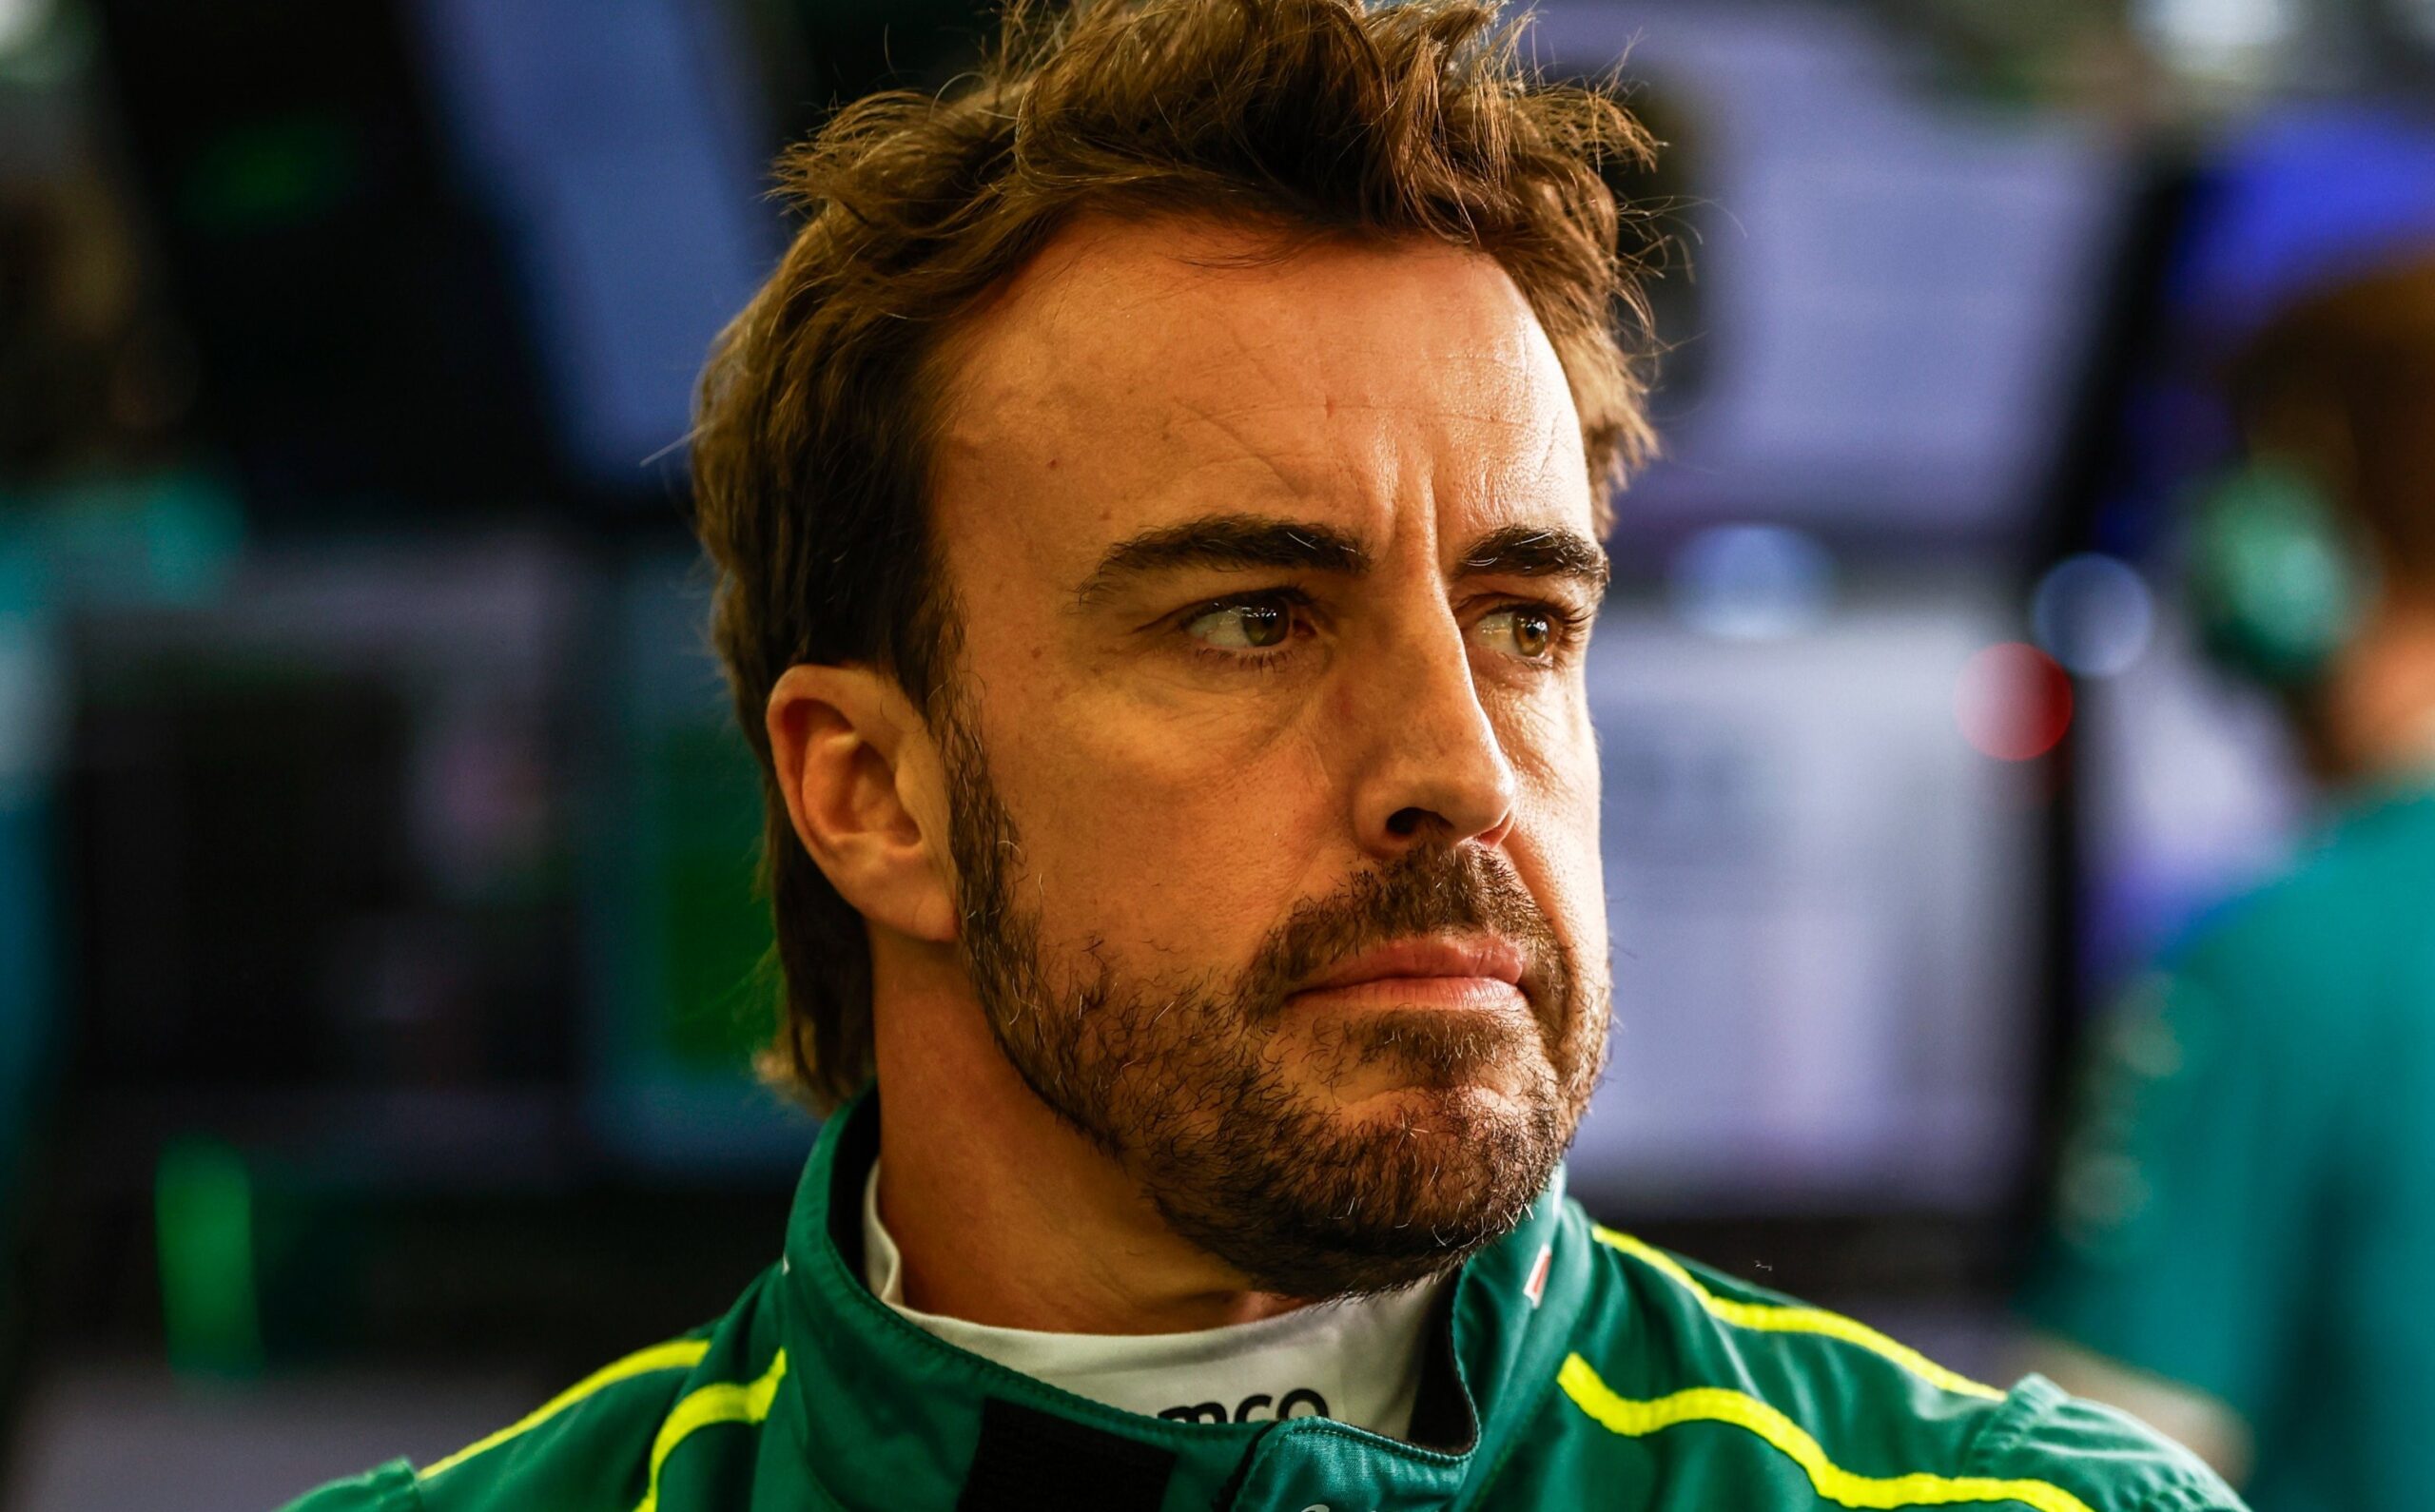 Fernando Alonso: I could still race at 49, or maybe even 50